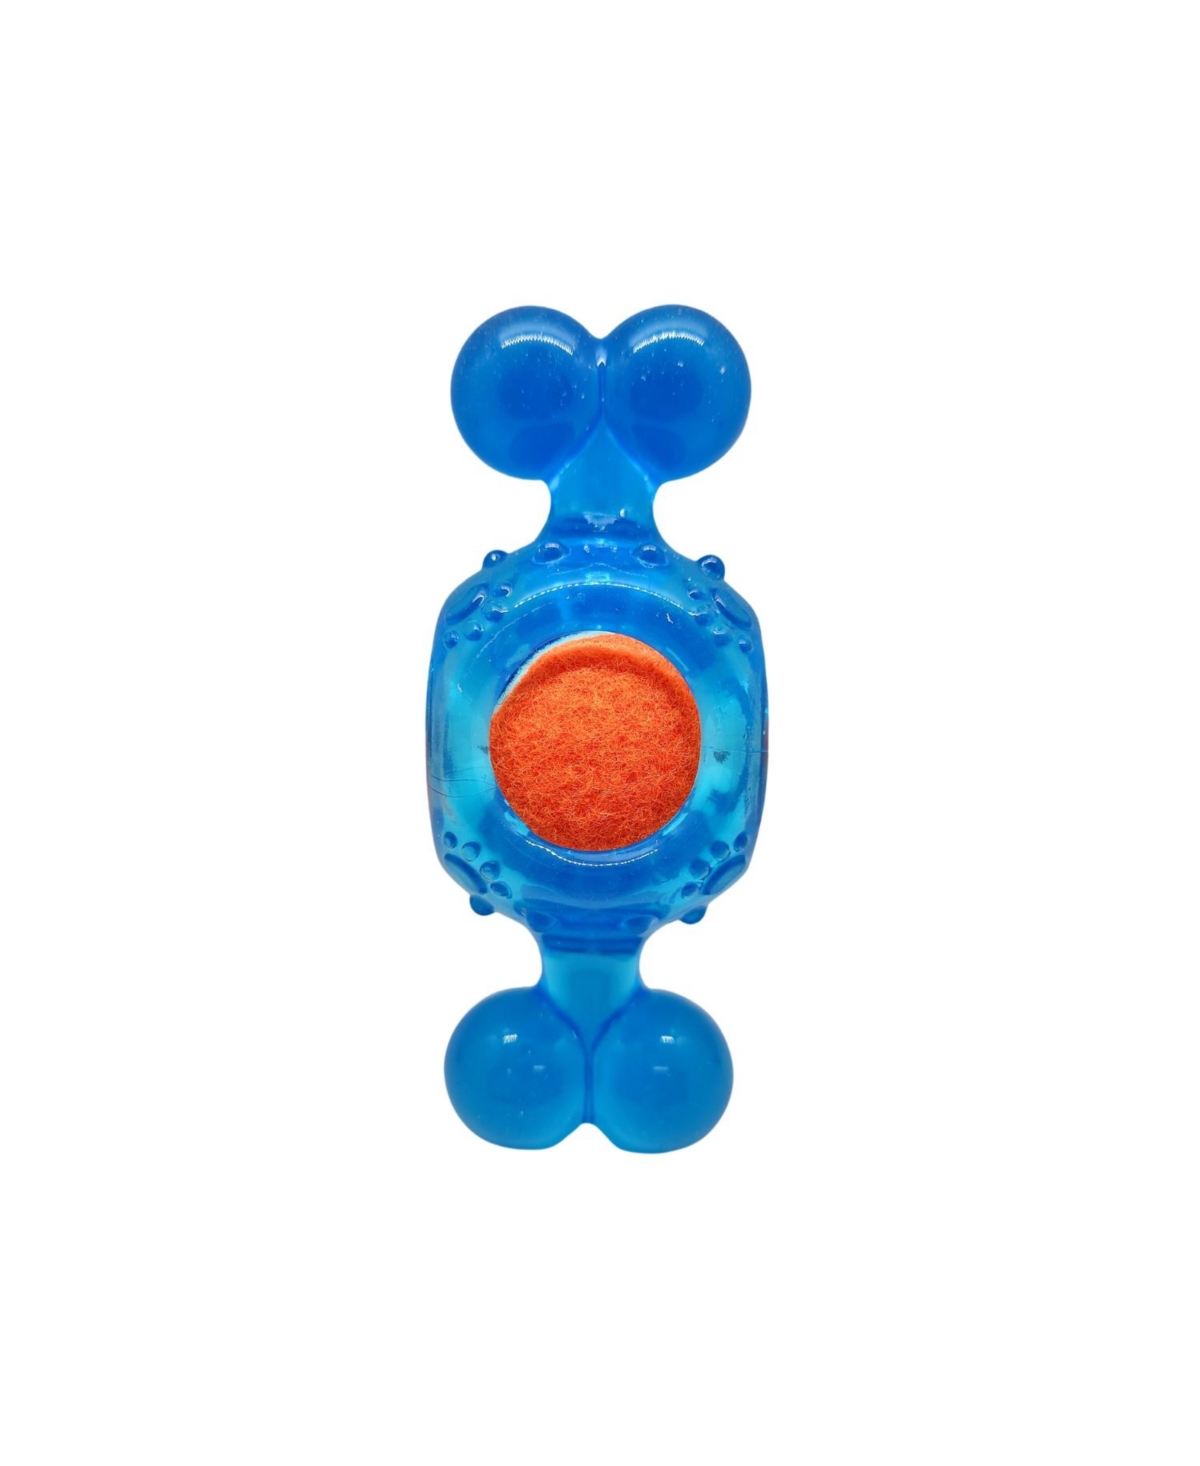 Candy-Inspired Tpr Squeaky Tennis Ball Dog Toy - Blue